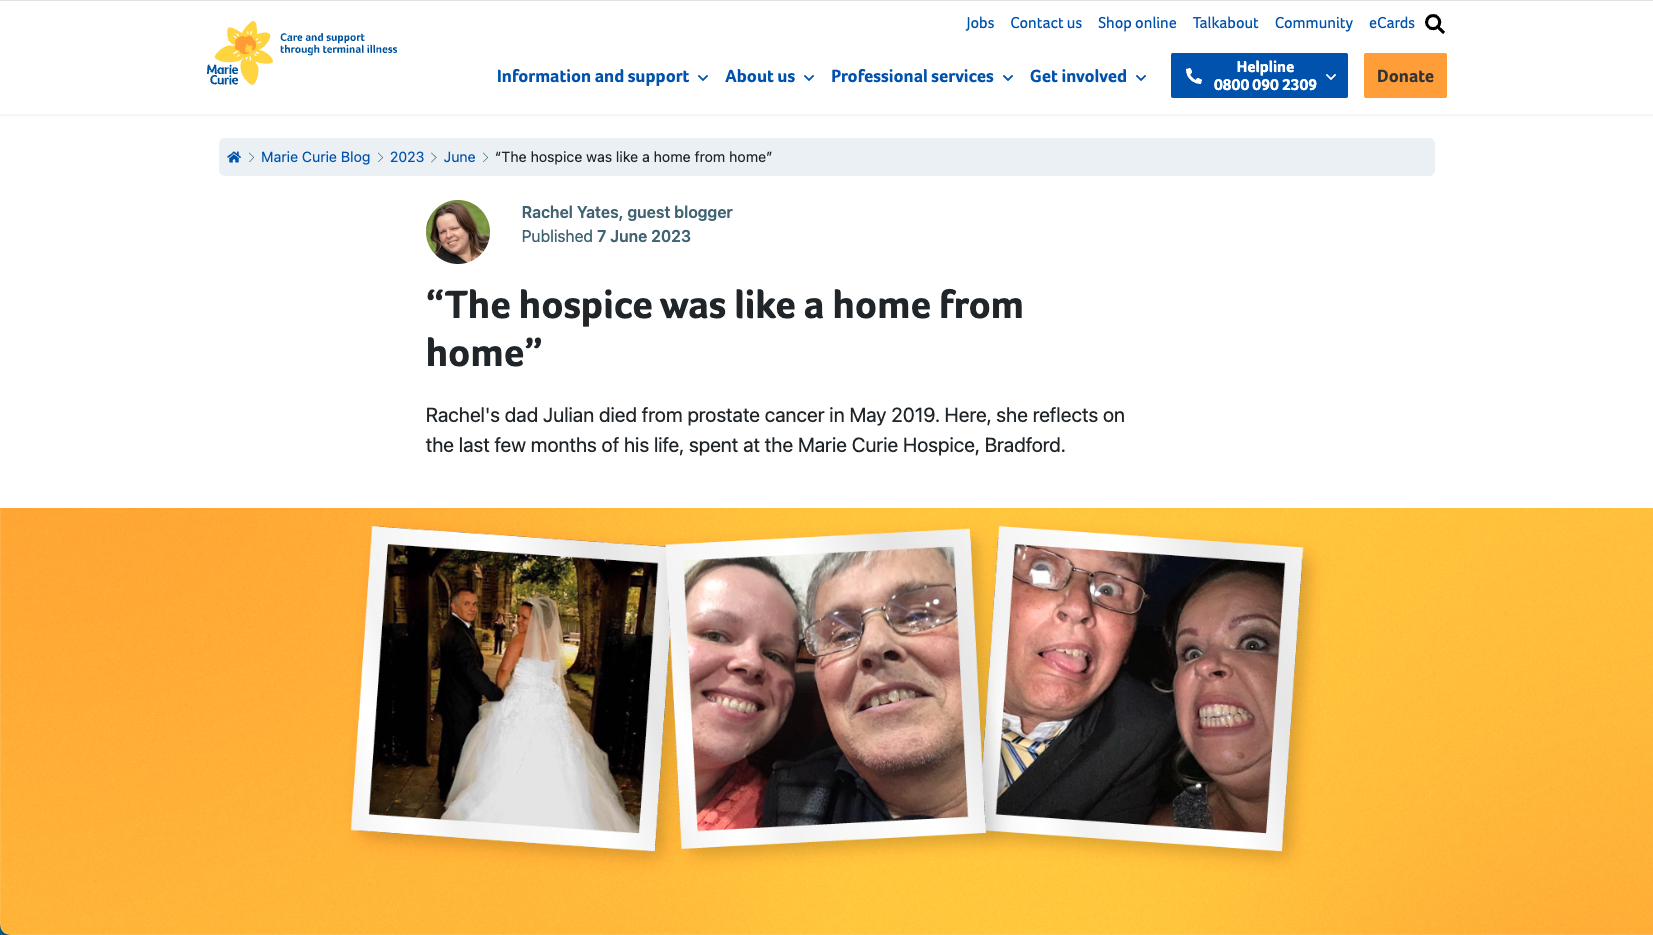 Screenshot from the Marie Curie charity website showing one of their guest blogs